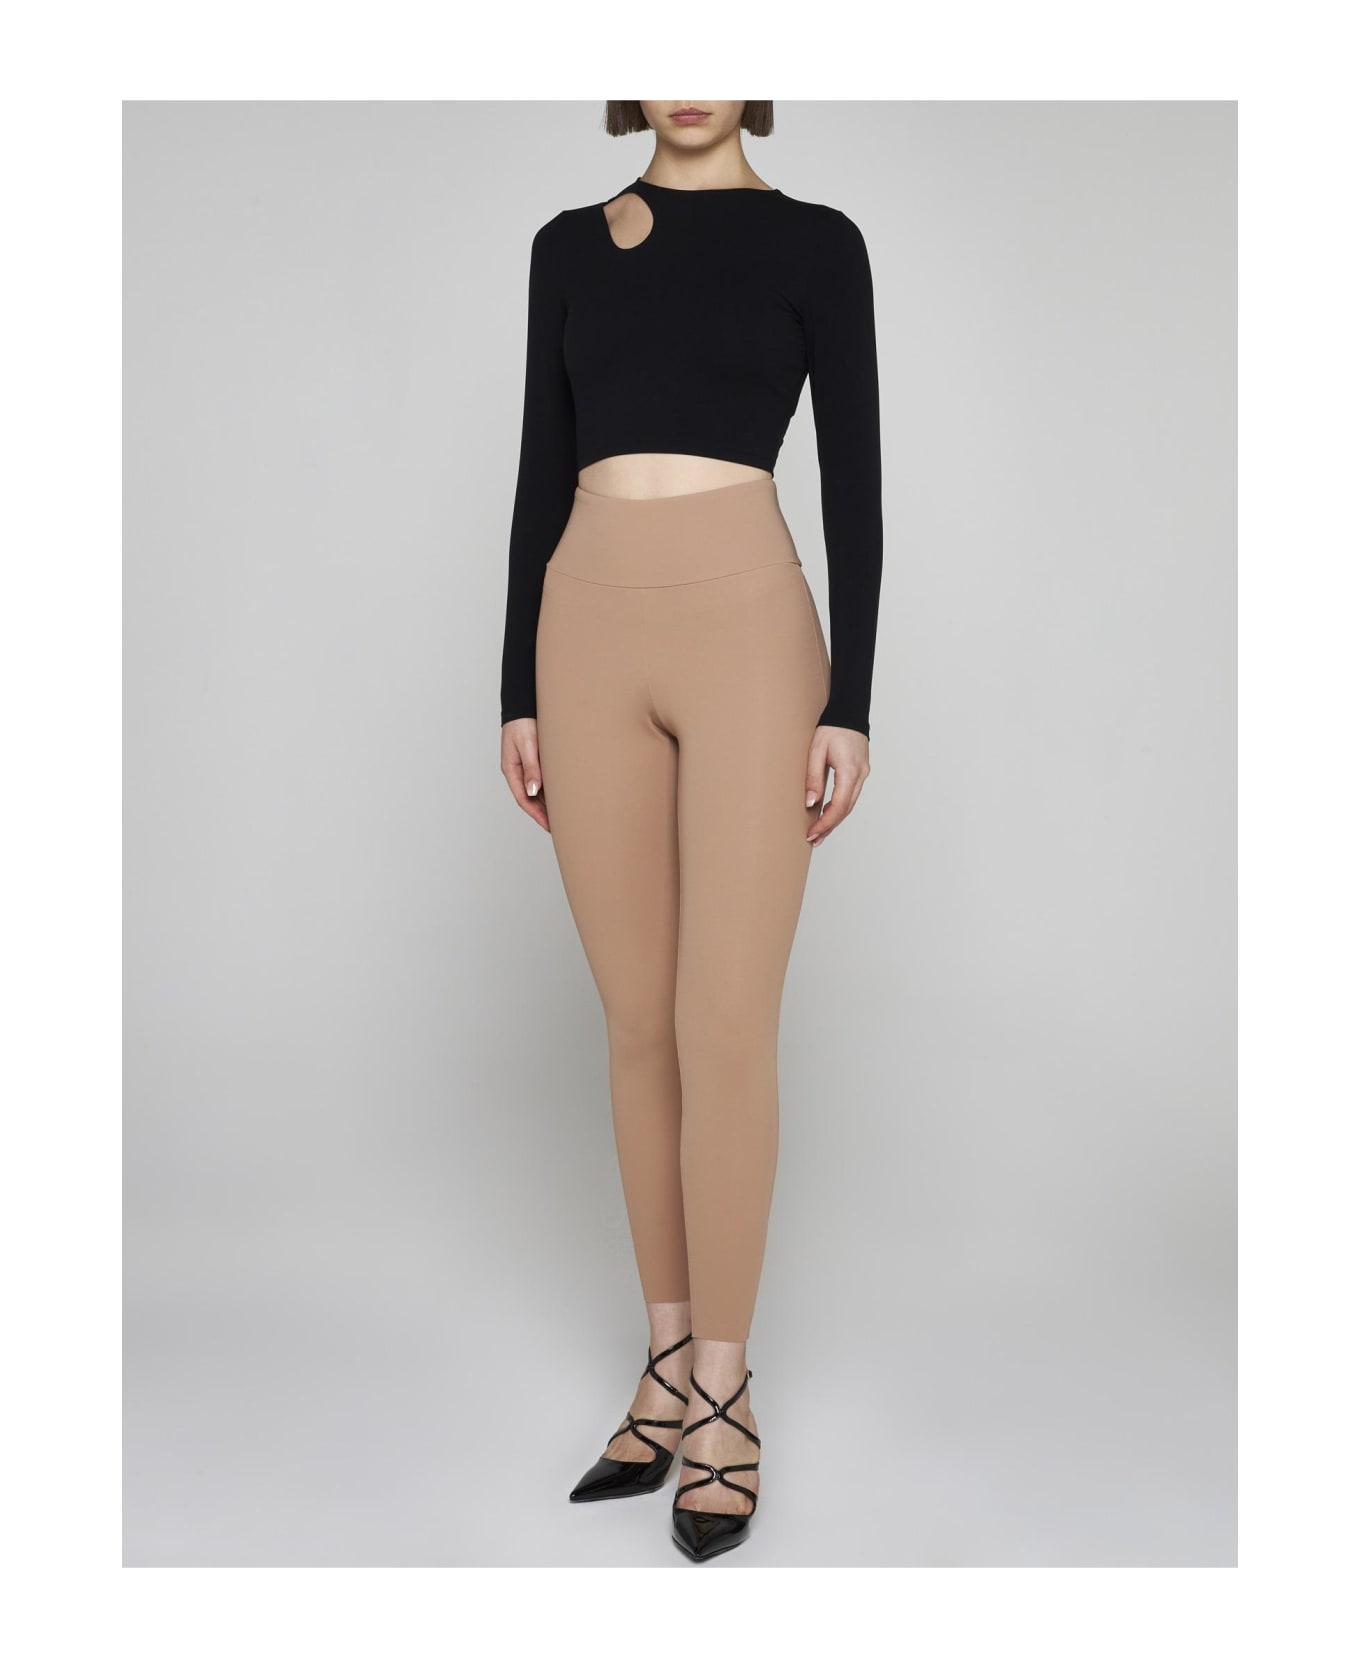 Wolford Warm Up Cropped Top - BLACK